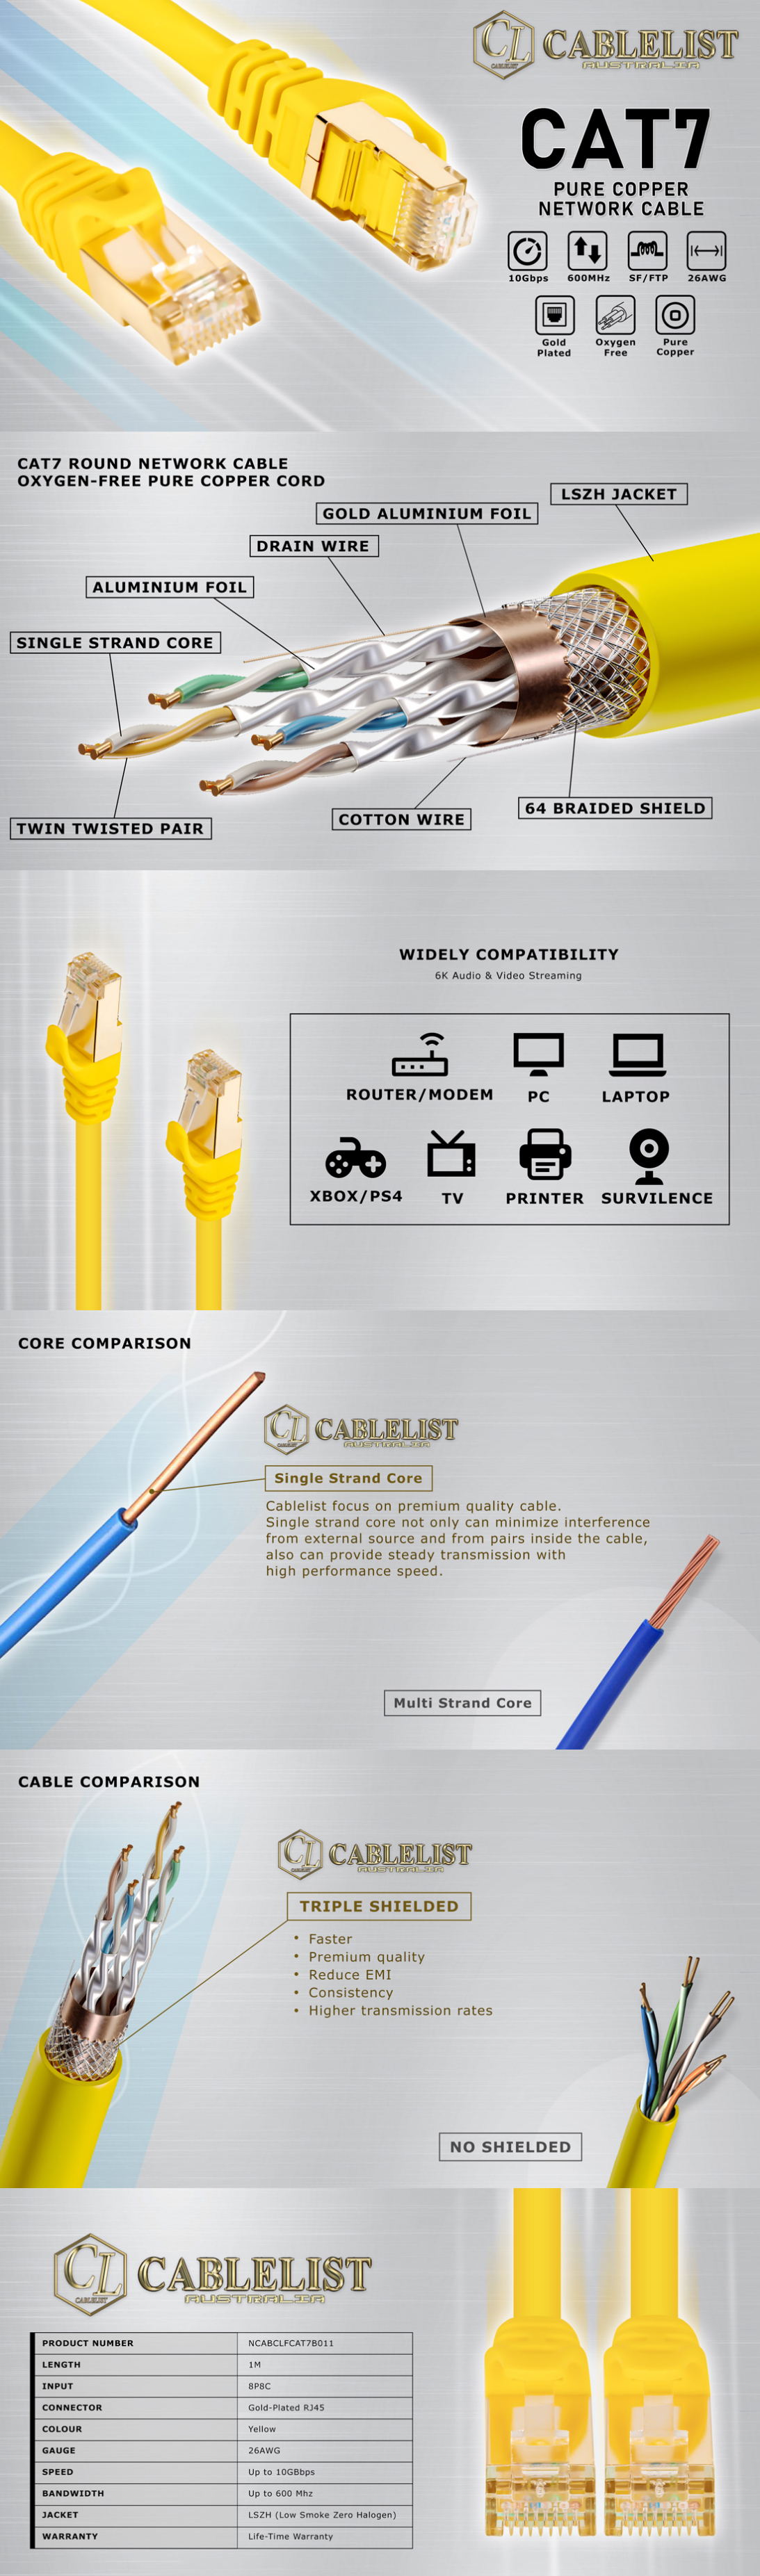 Fishing-Reels-Cablelist-CAT7-YELLOW-1Meter-SF-FTP-RJ45-Ethernet-Network-Cable-1